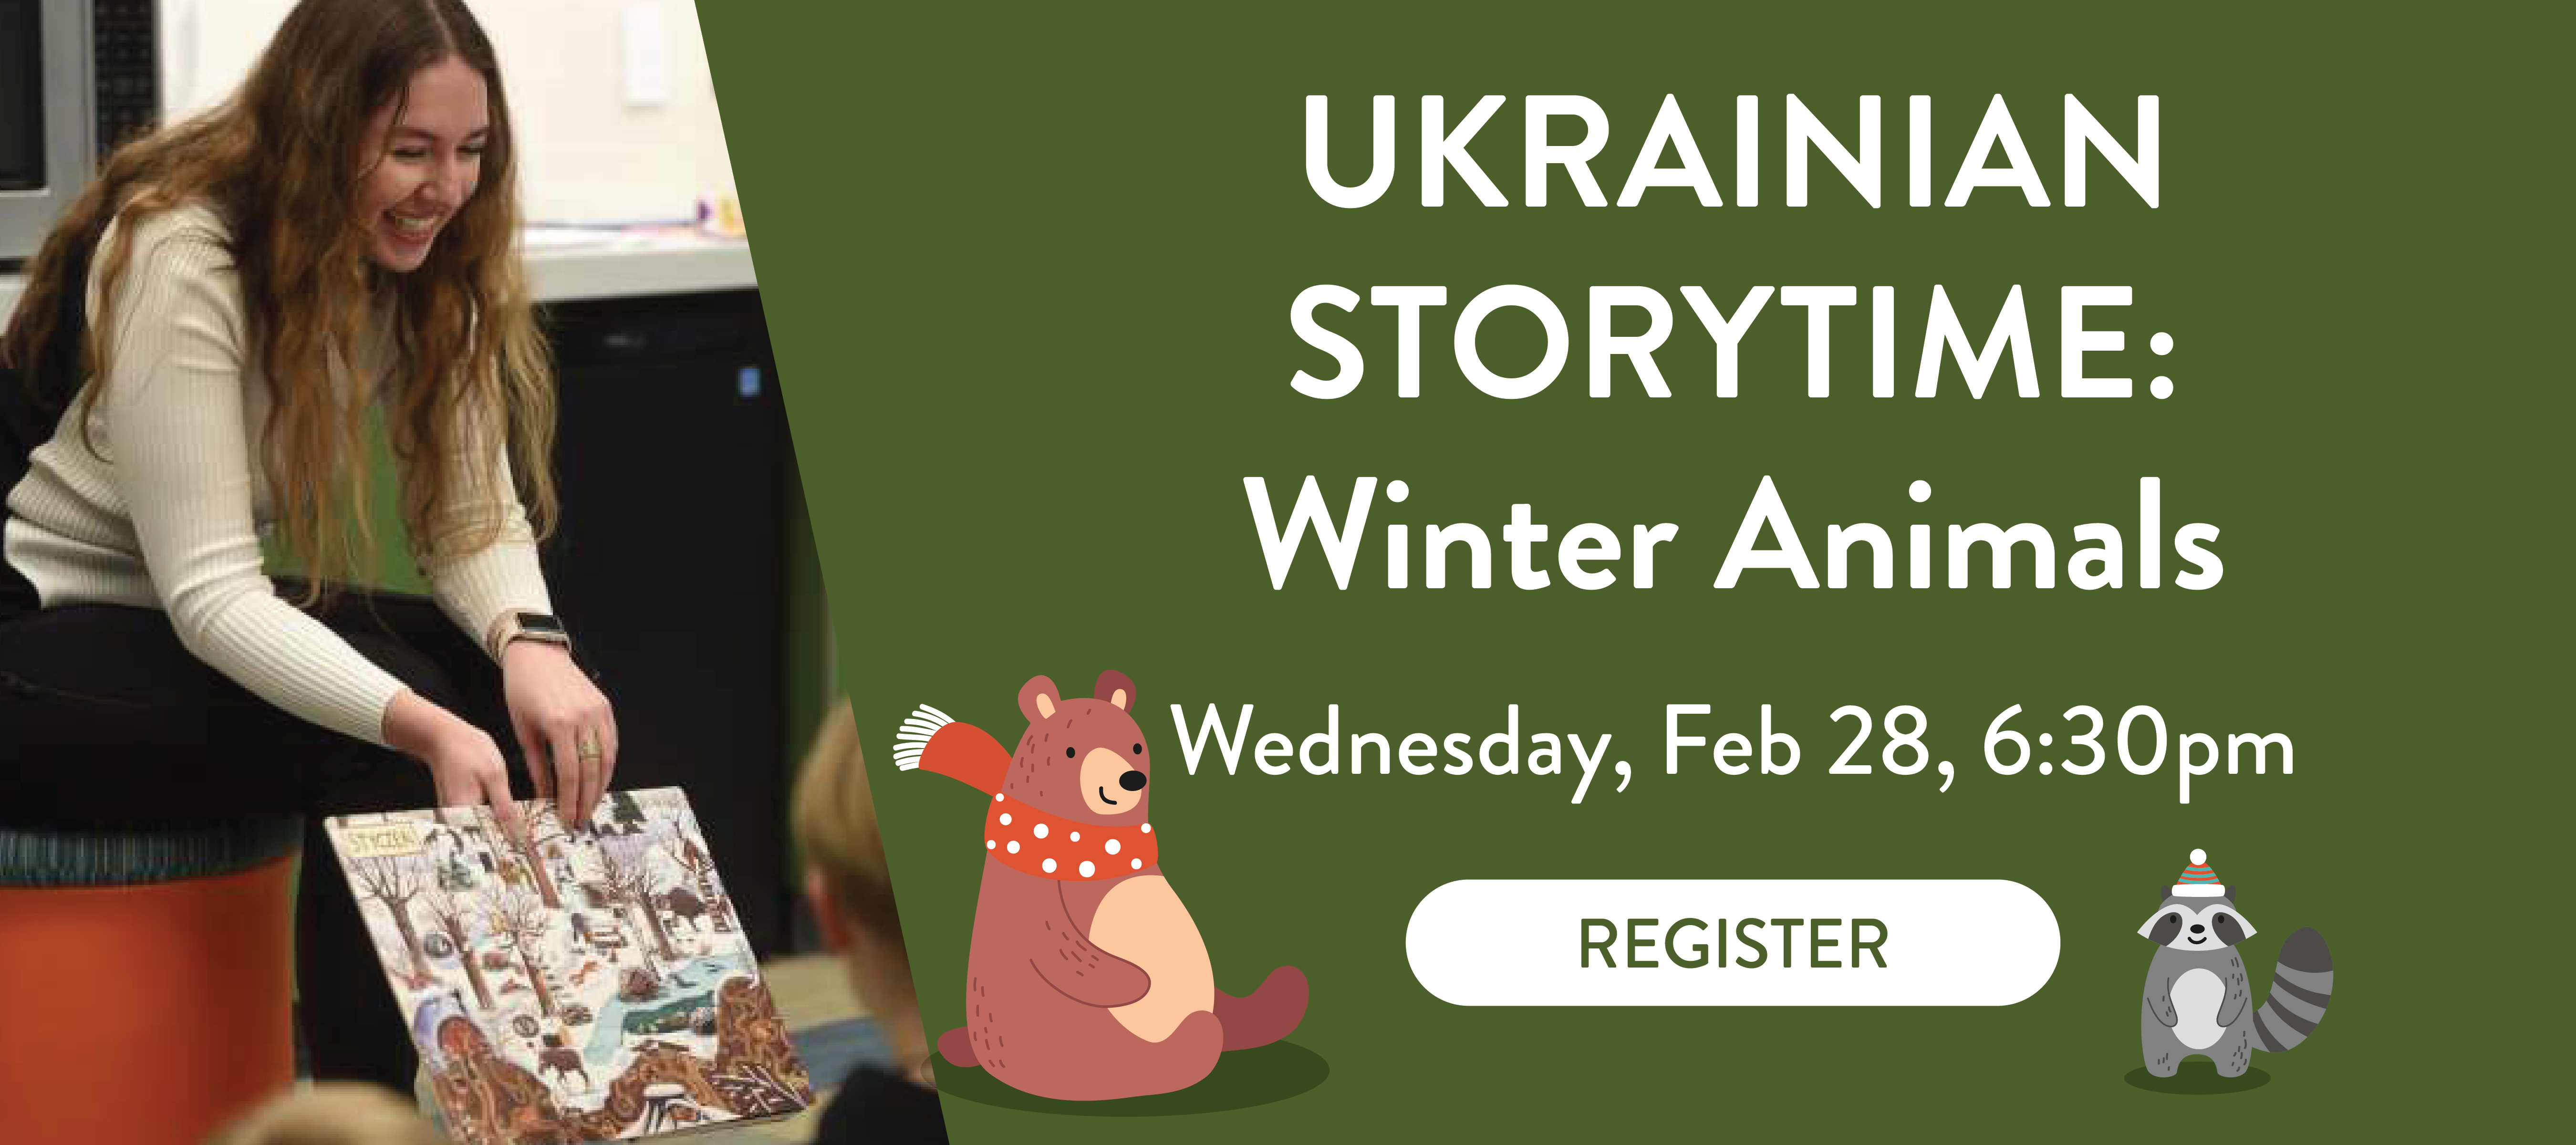 phpl, prospect heights public library, Ukrainian Storytime, Youth